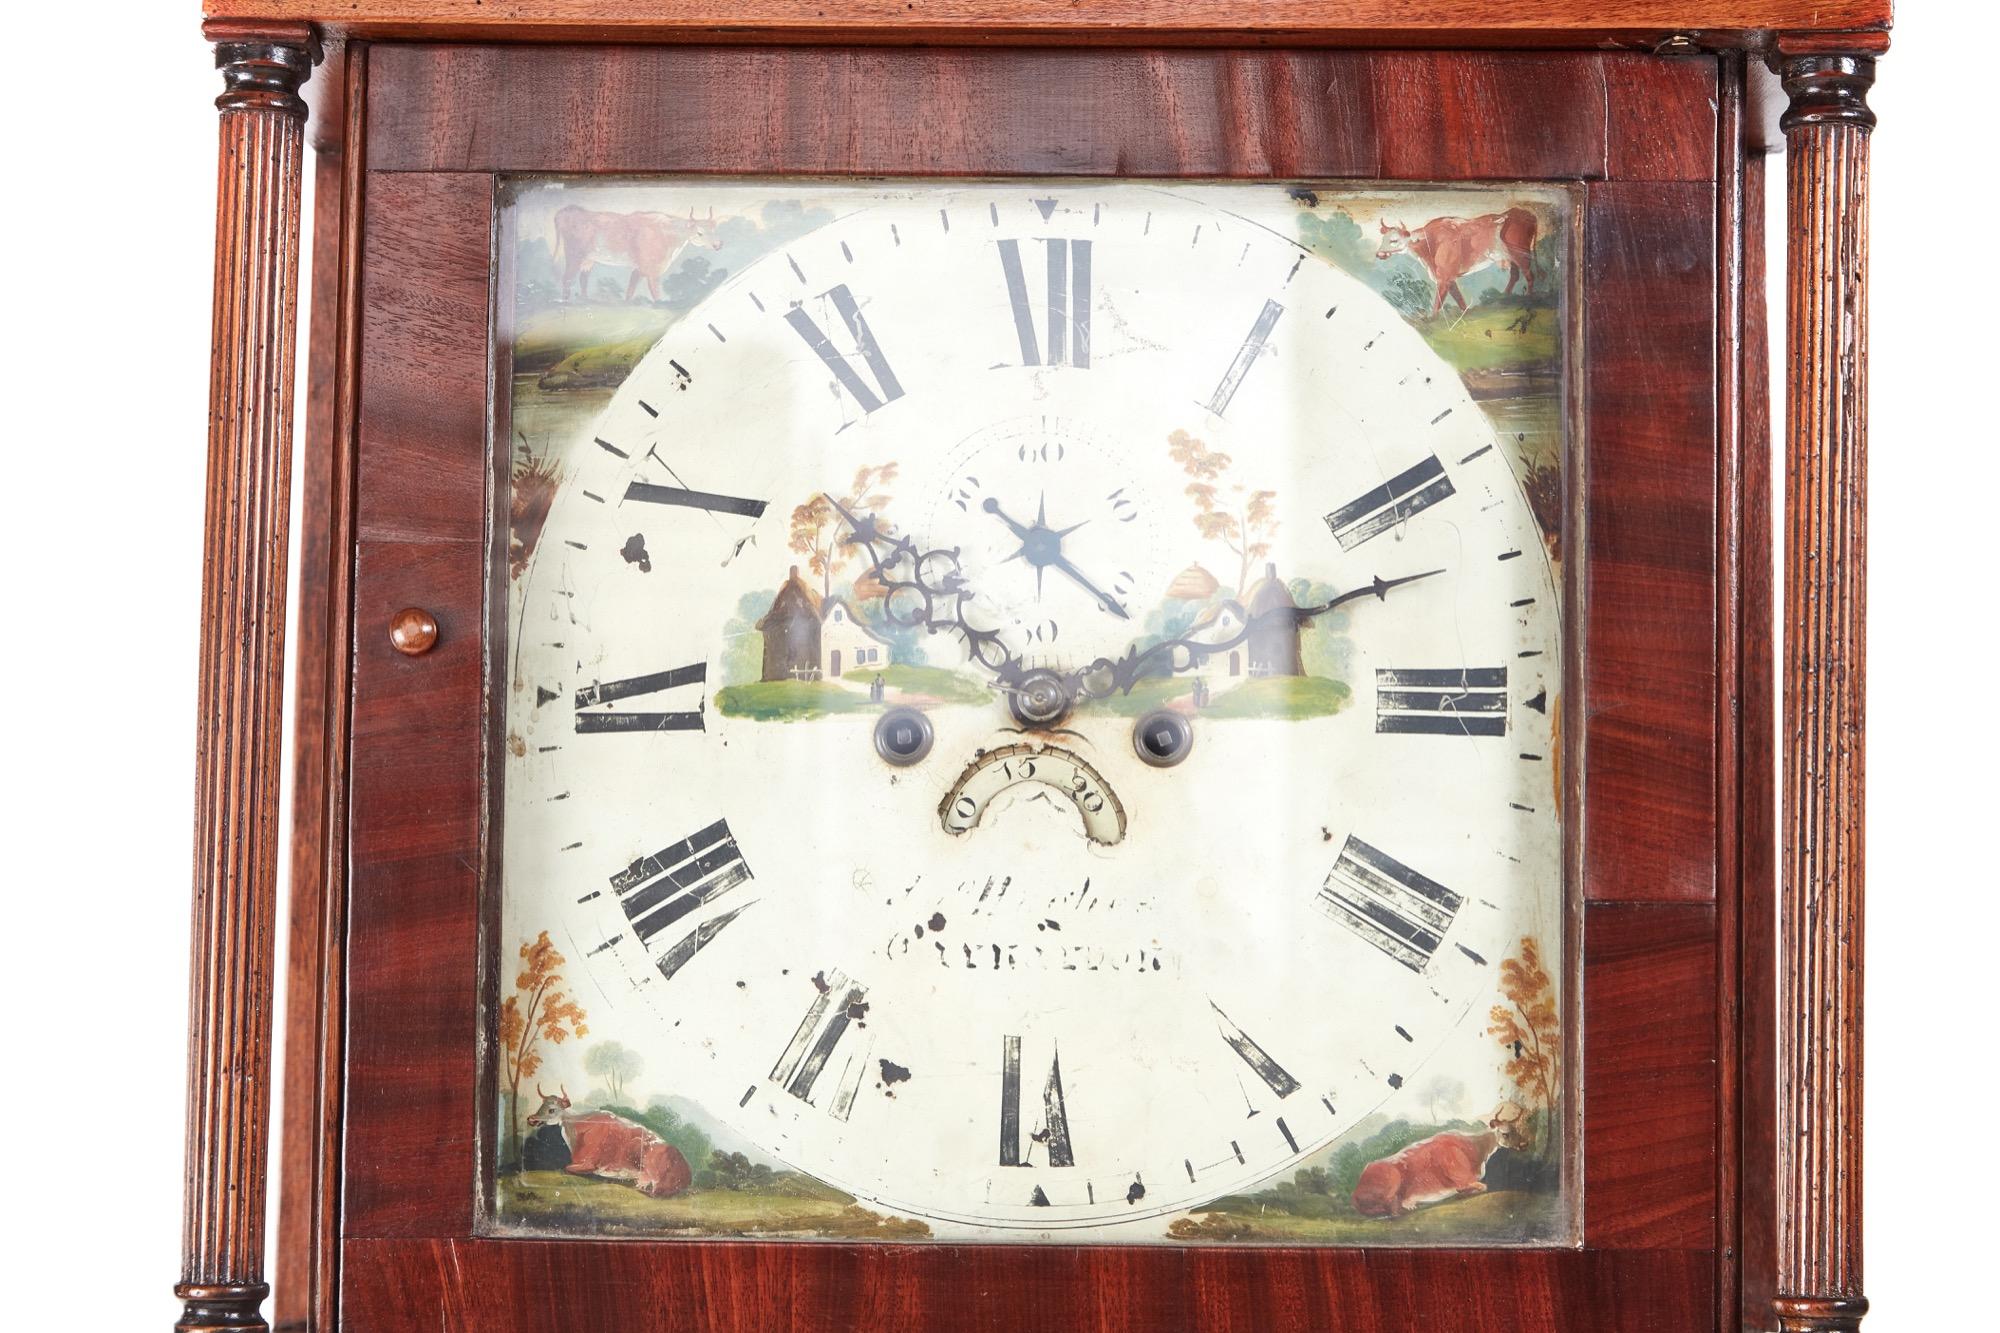 Antique oak eight day longcase clock with a swan-neck pediment, pretty hand painted face depicting cows and cottages and a delightful oak case crossbanded in mahogany. Attractive reeded columns flank both the hood and the shaped plinth base. It has